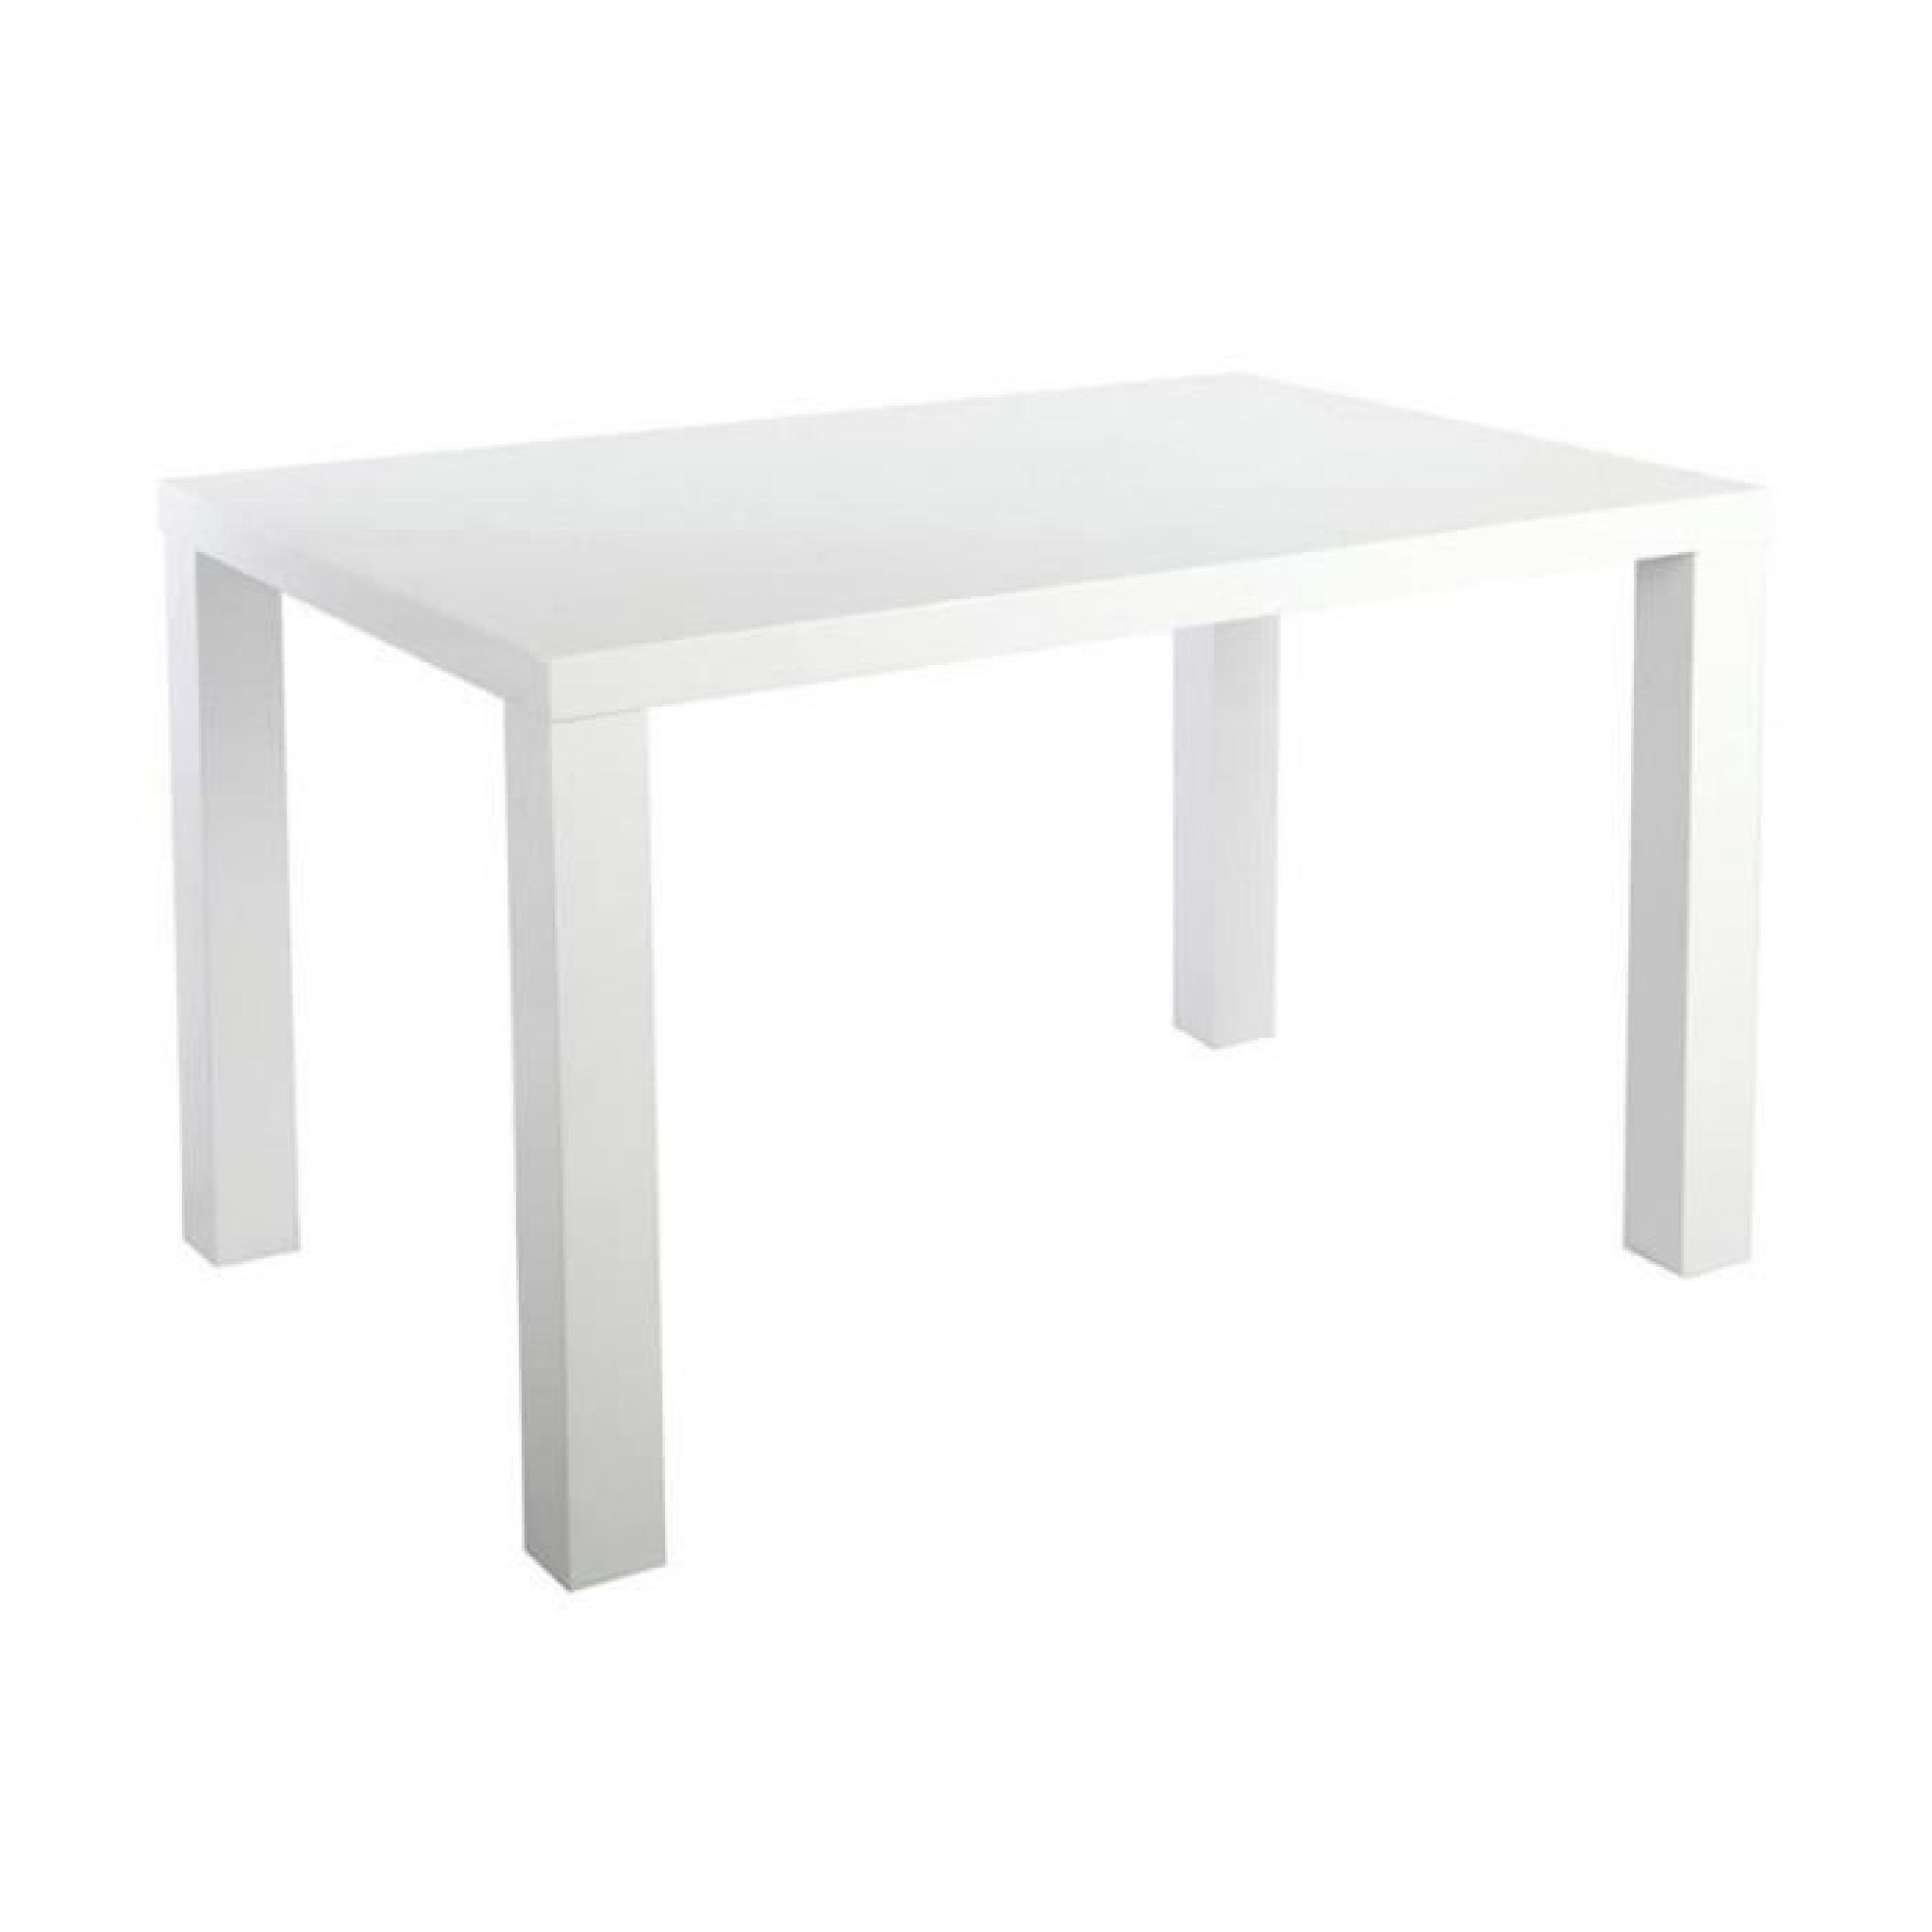 . Table repas blanche laquée Glossy 120 cm.